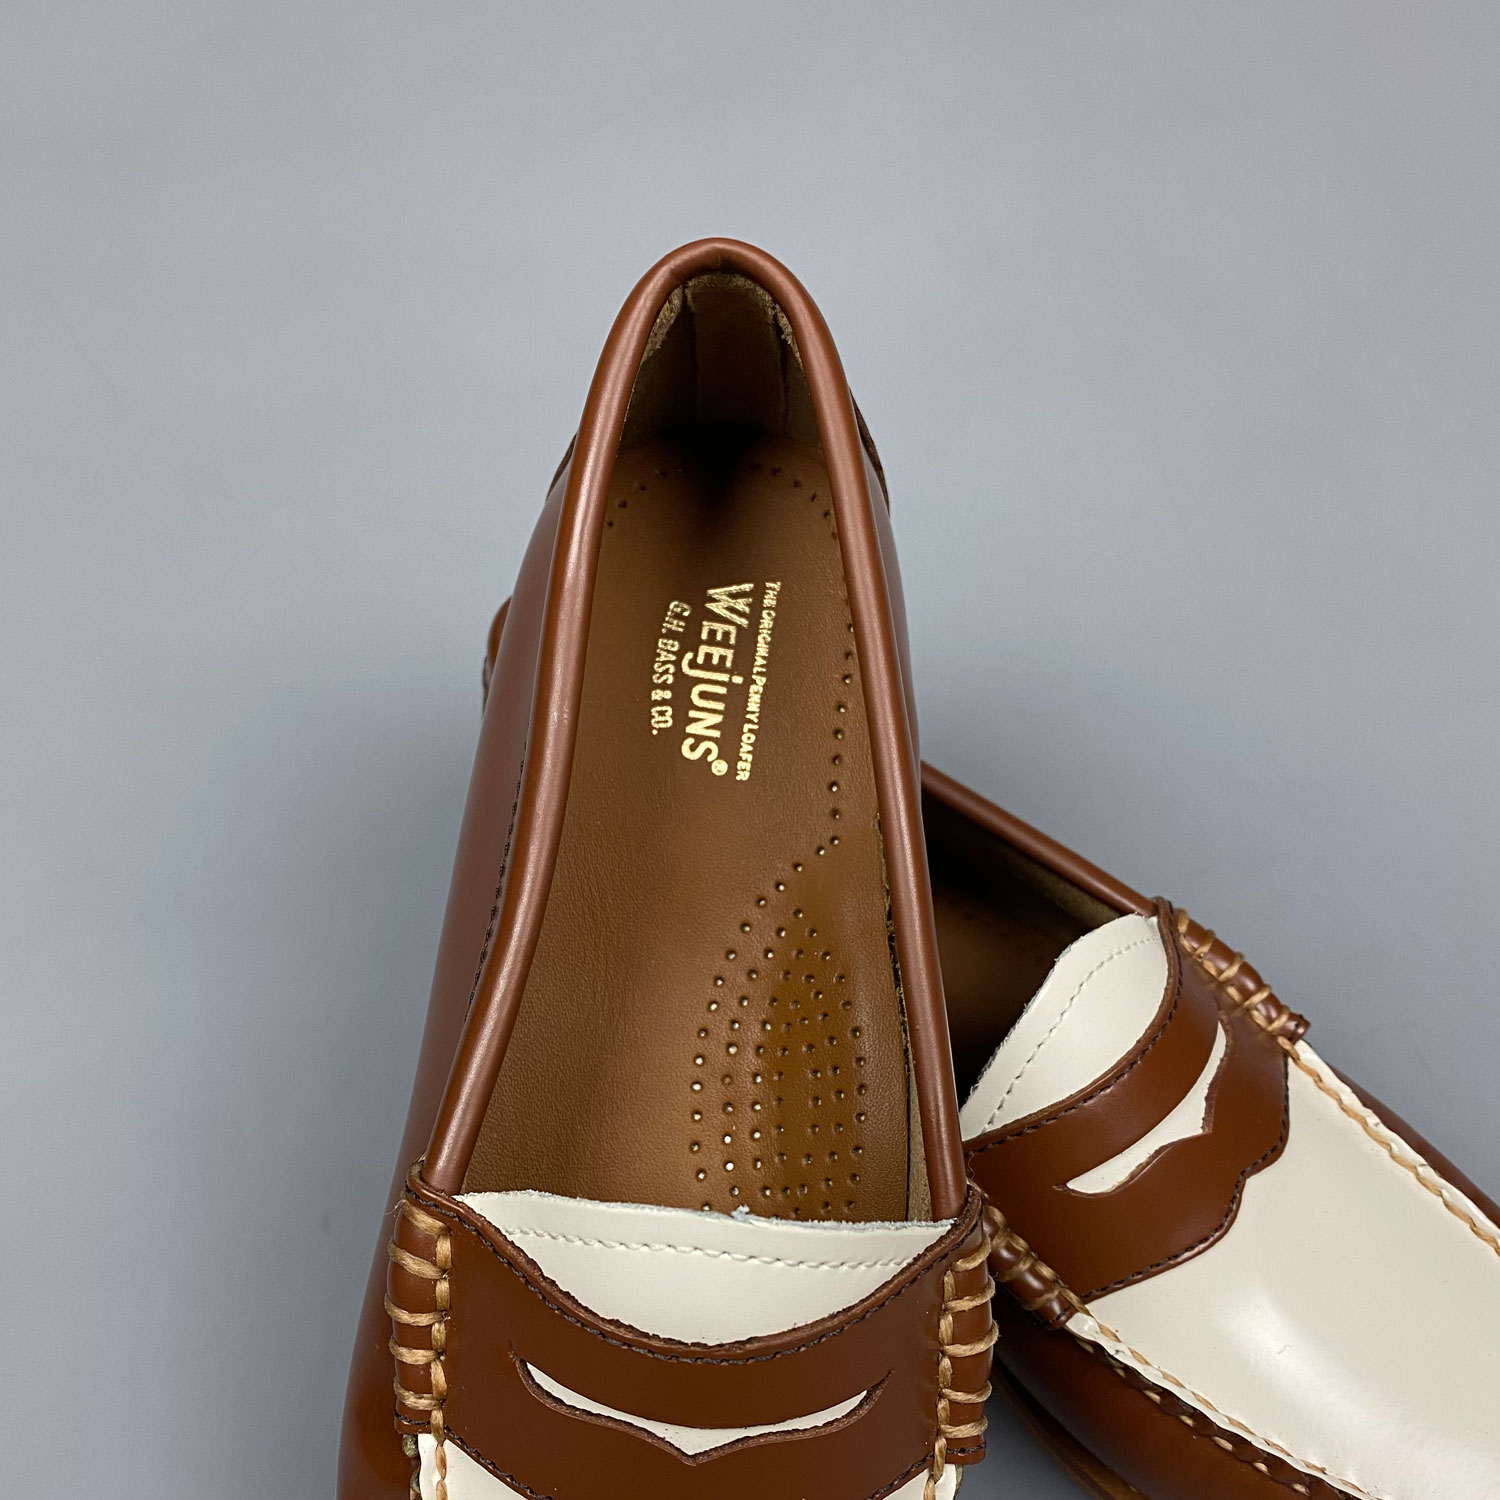 Shop G.H. Bass Weejun penny two-tone online at Shoes & Shirts